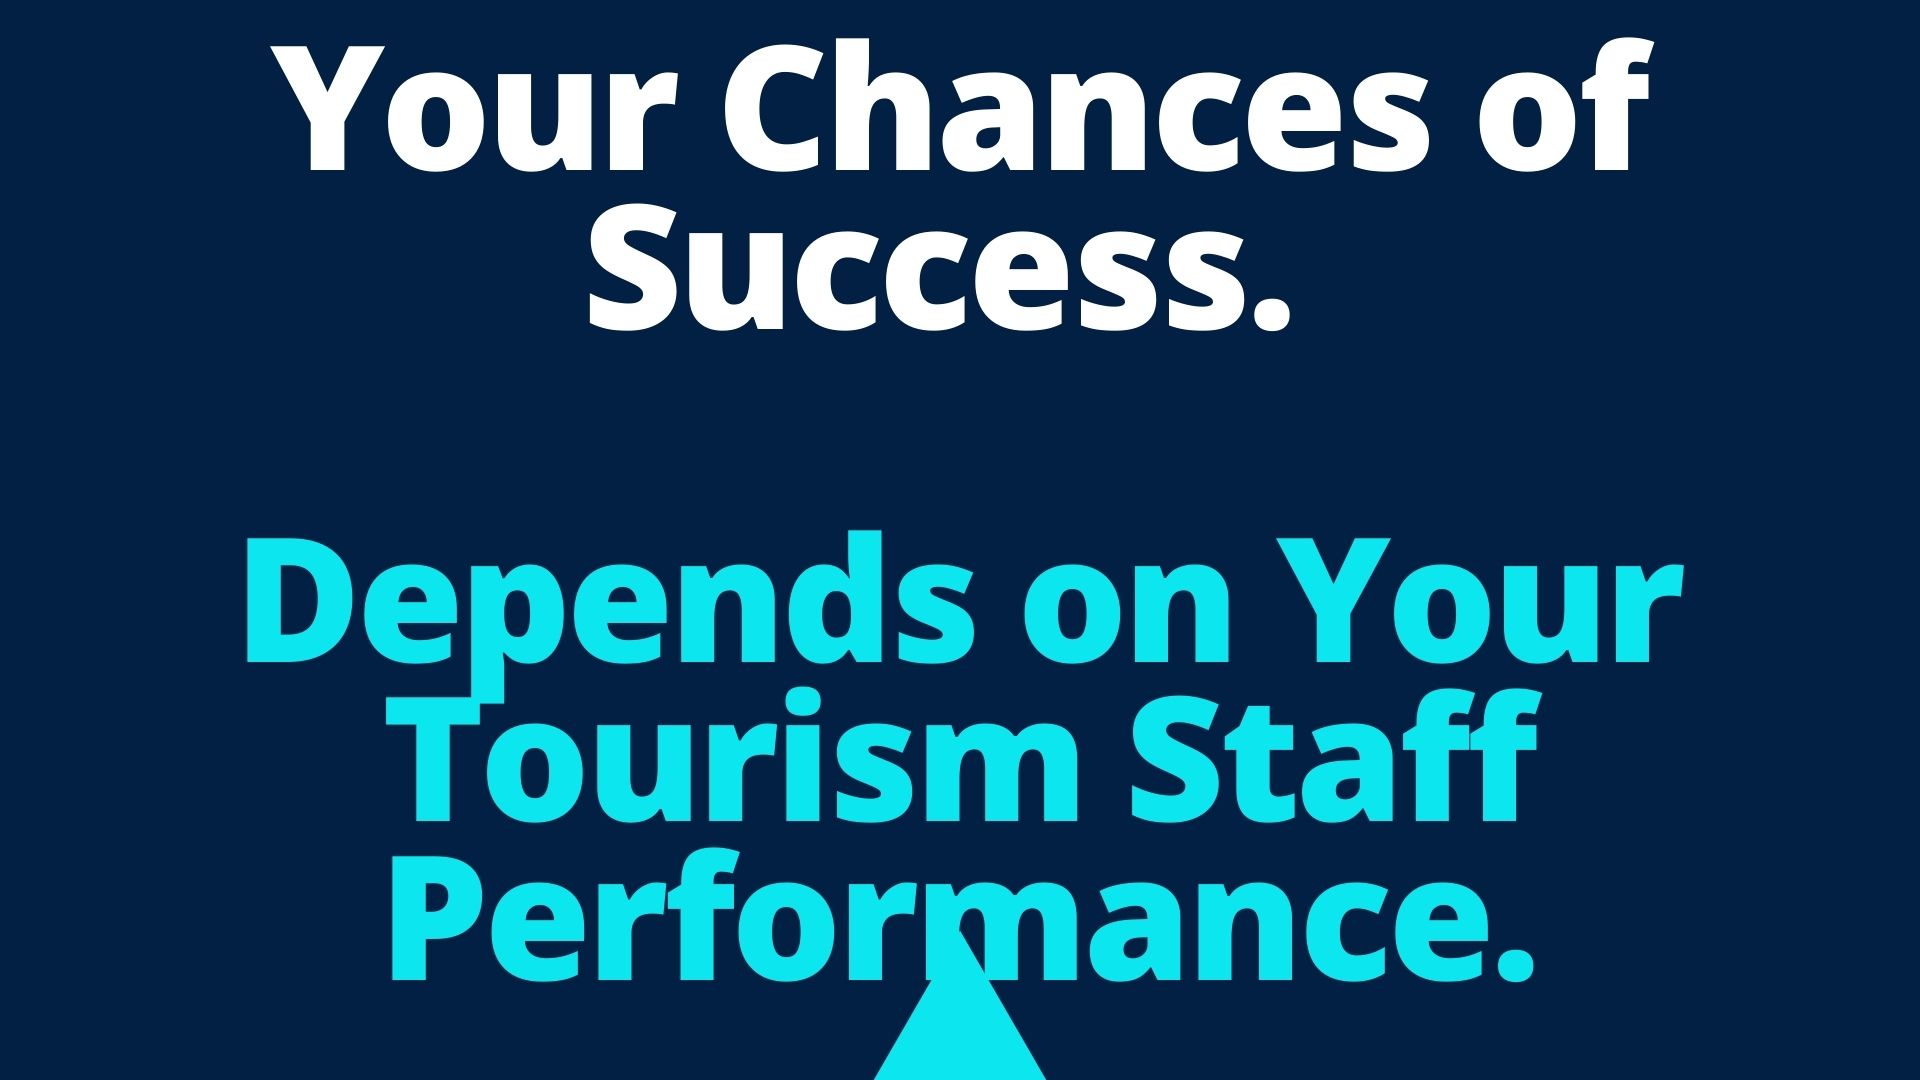 How To Increase Tourism Staff Performance